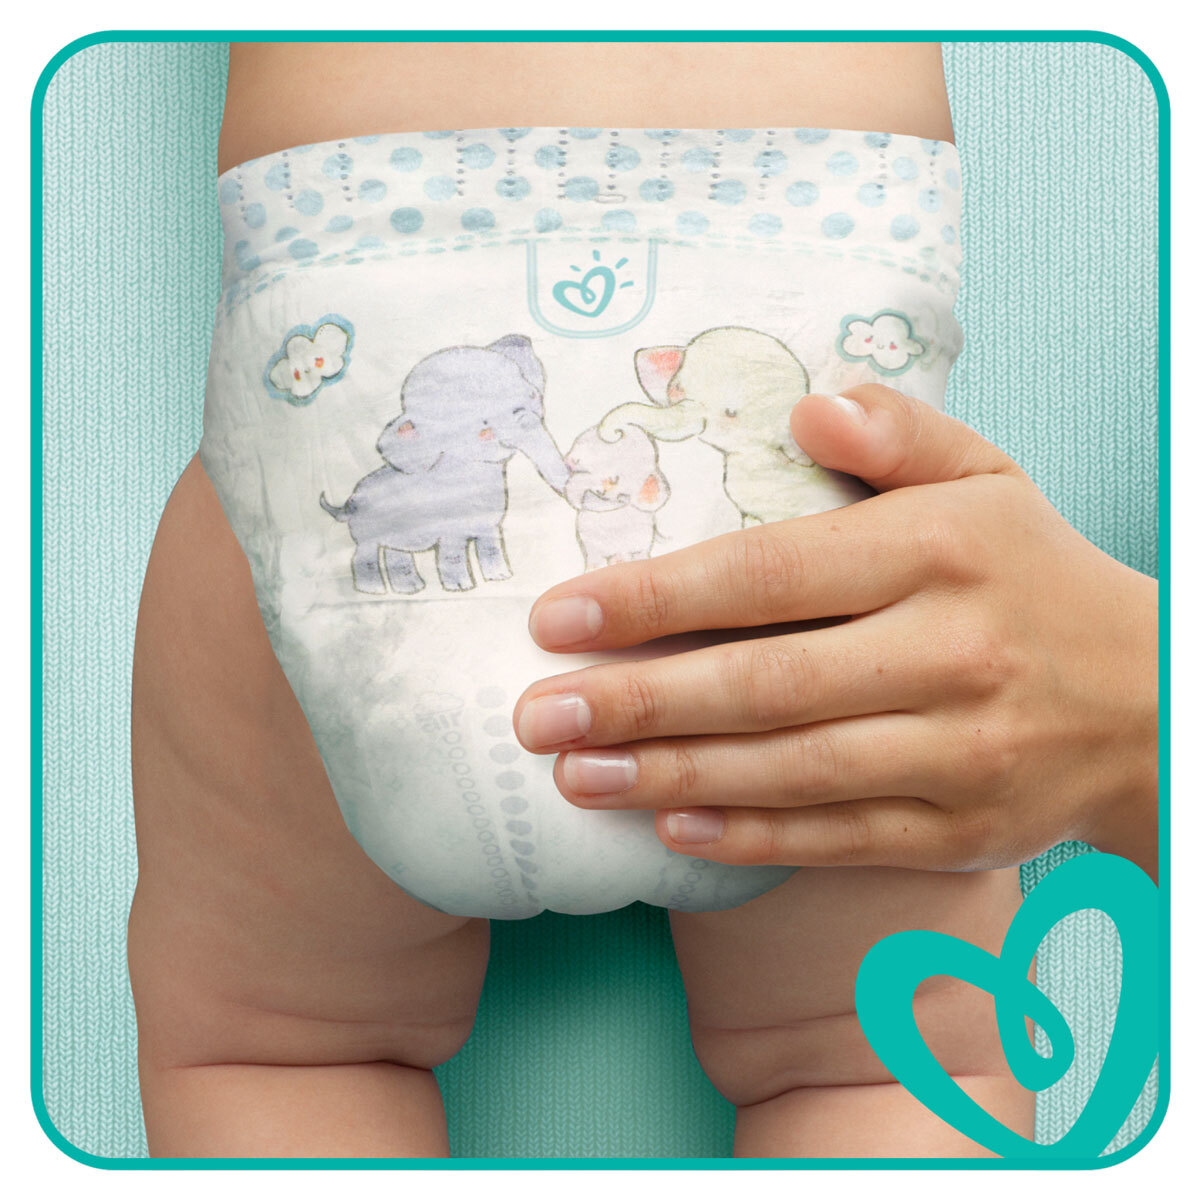 Pampers Baby Dry Nappies Size 4, 36 x Monthly 174 Pack